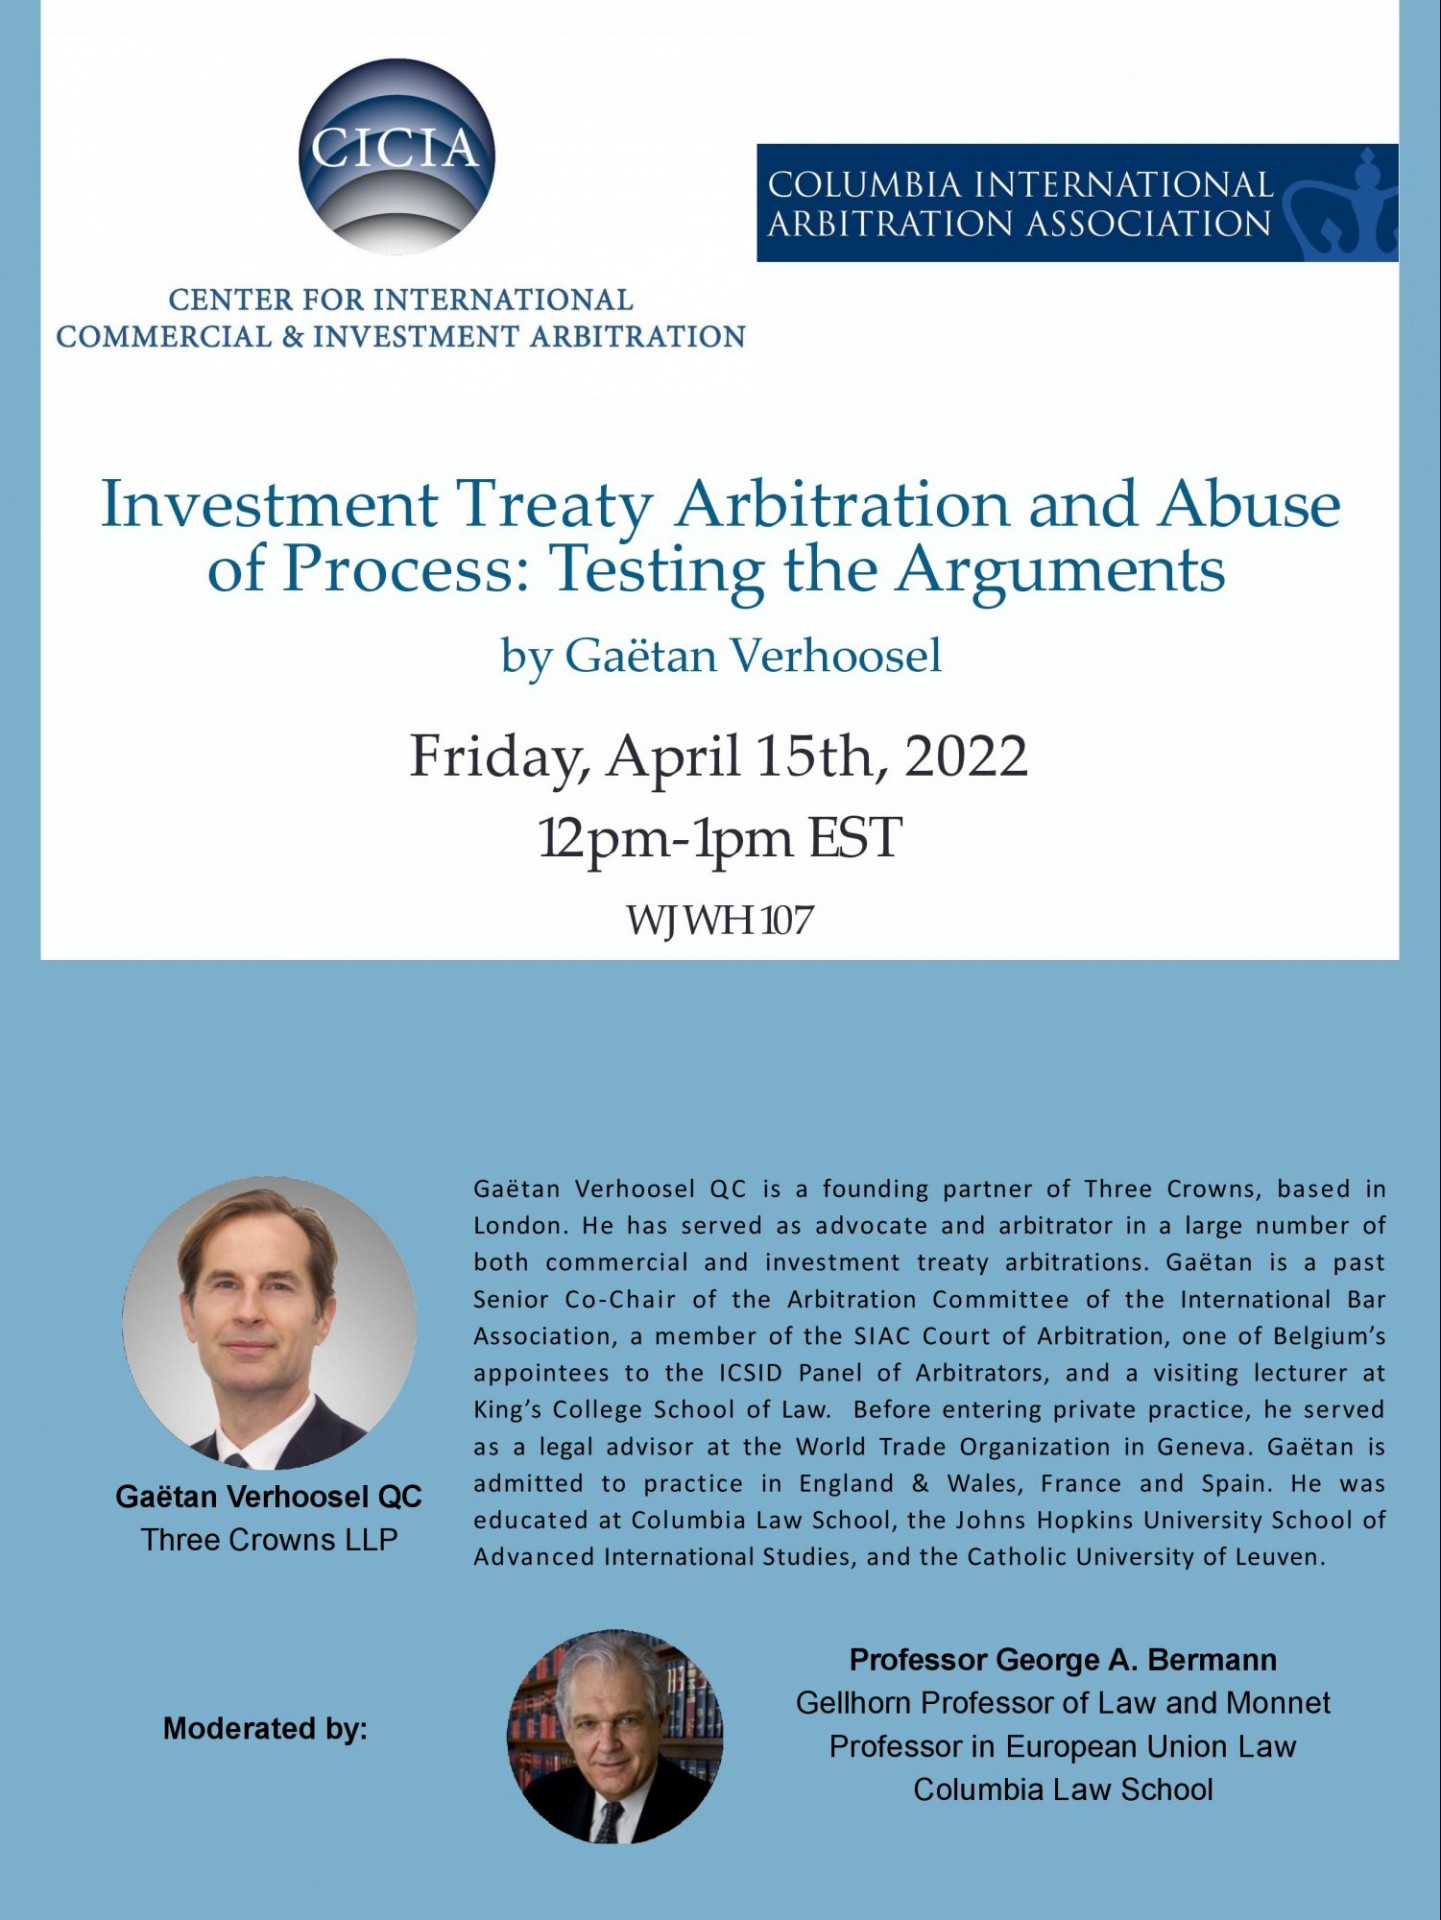 Investment Treaty Arbitration and Abuse of Process: Testing the Arguments